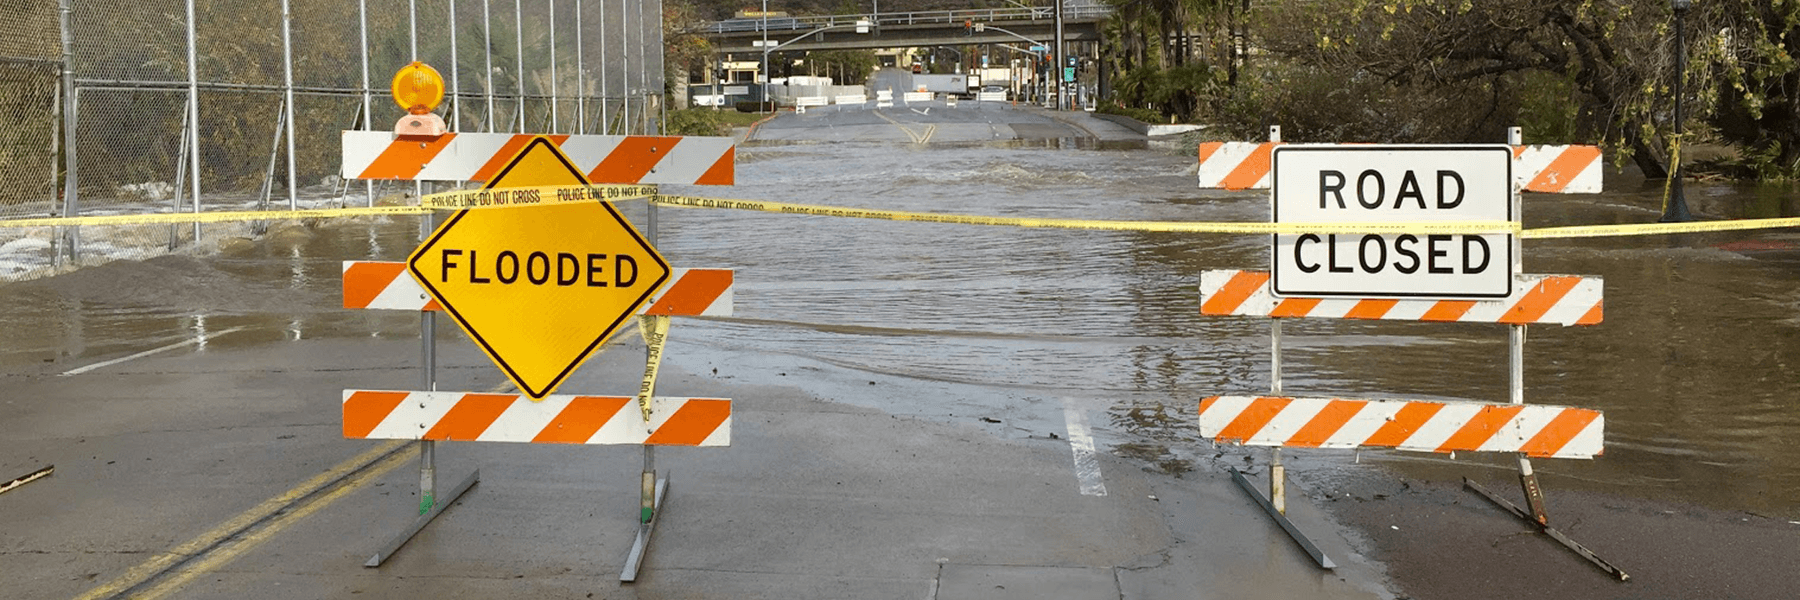 Flooded road closure, Photo credit: USGS